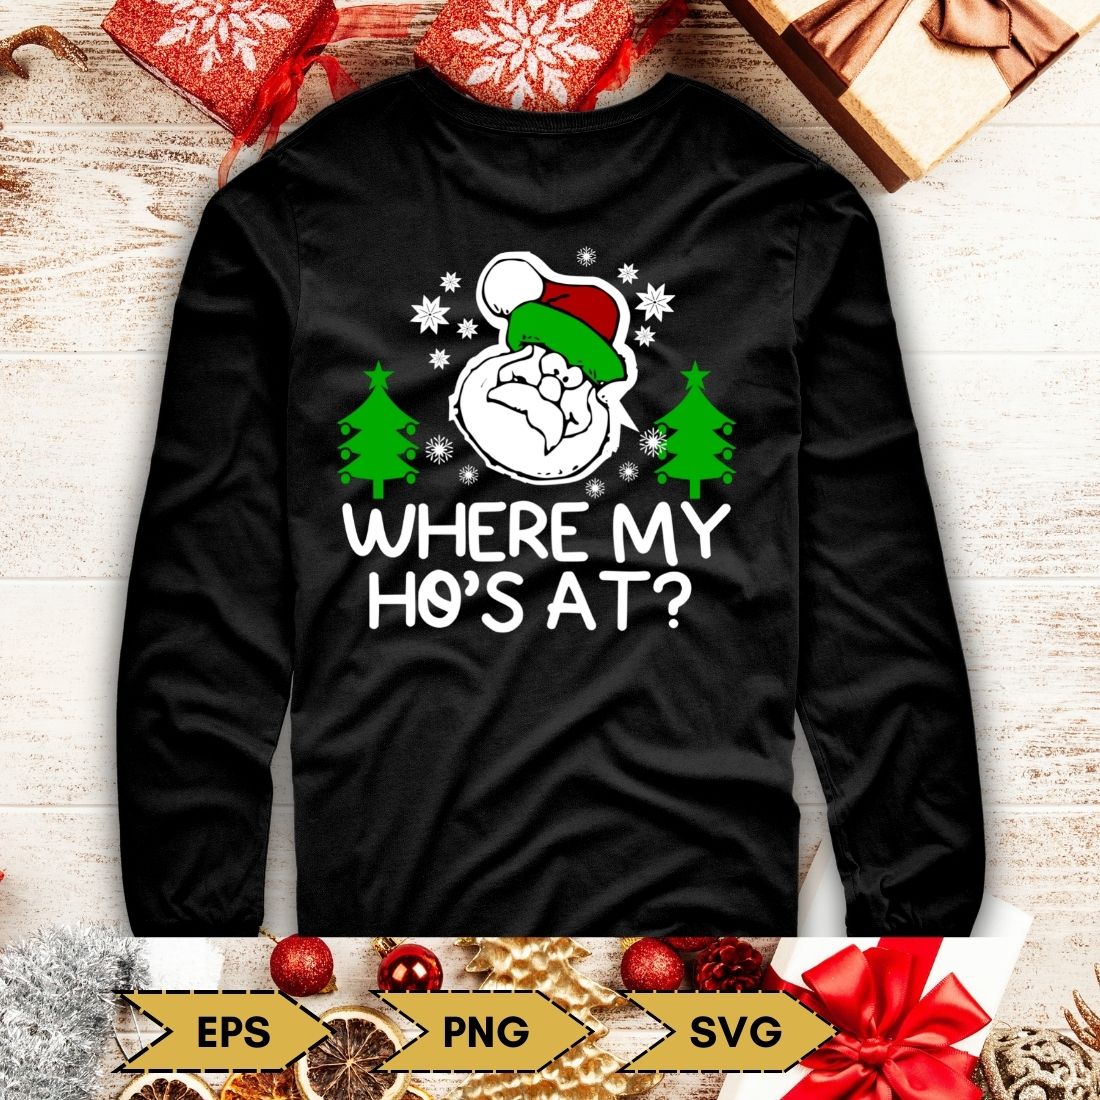 Picture of a black sweatshirt with a cute print on the Christmas theme.